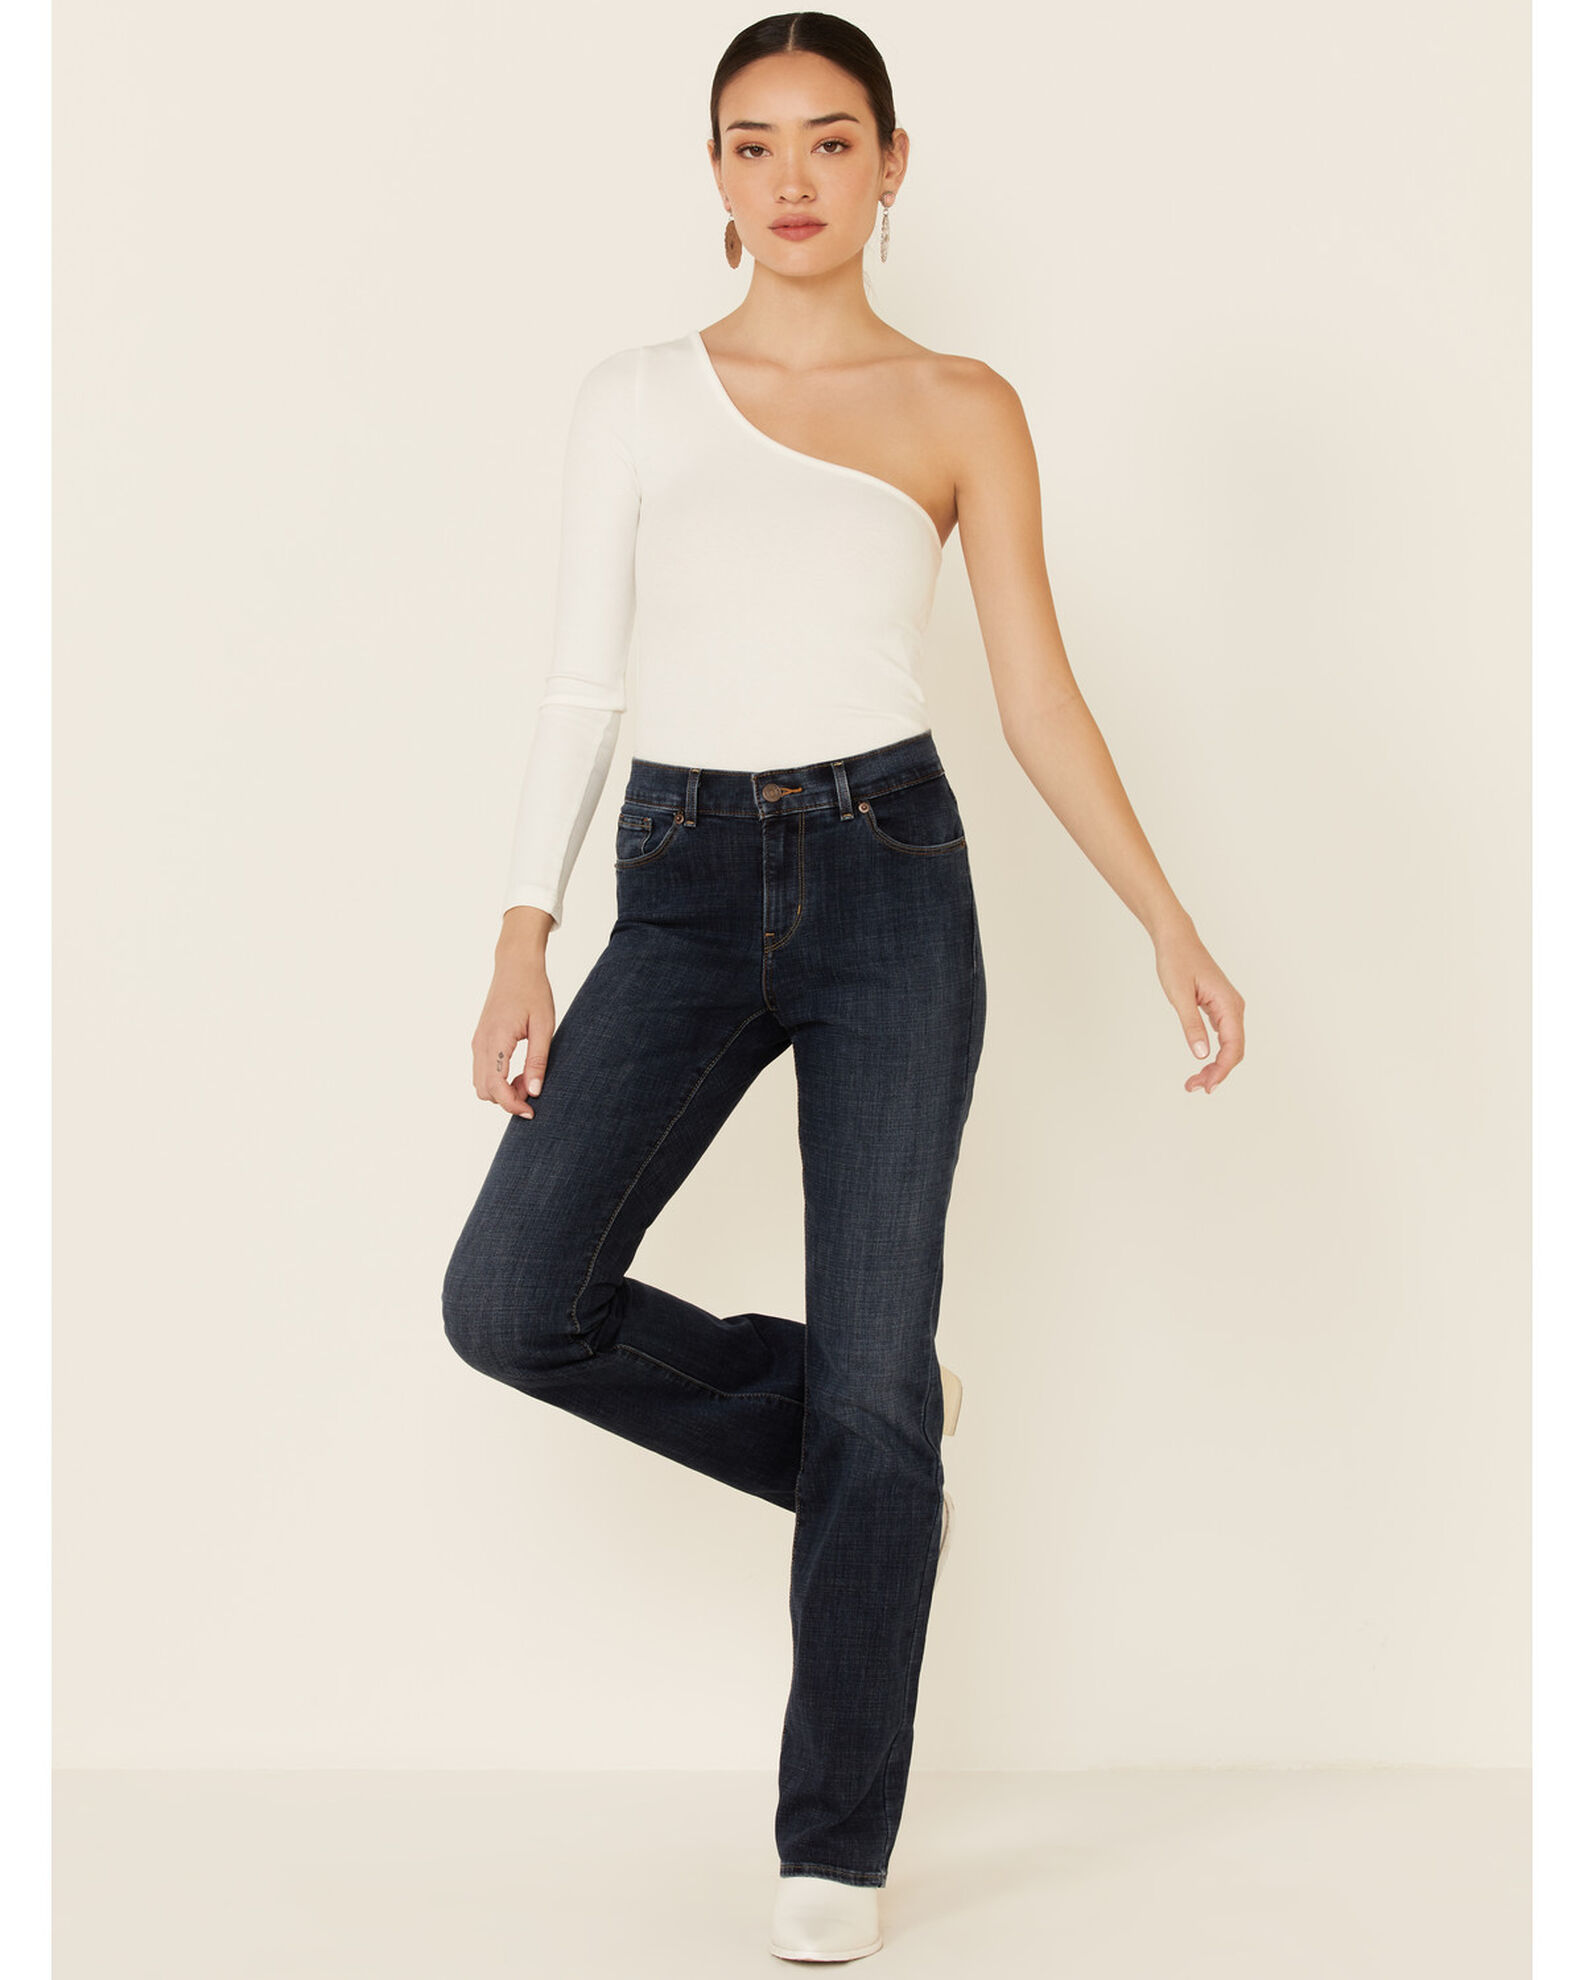 Levi's Women's Classic Bootcut Jeans - Country Outfitter